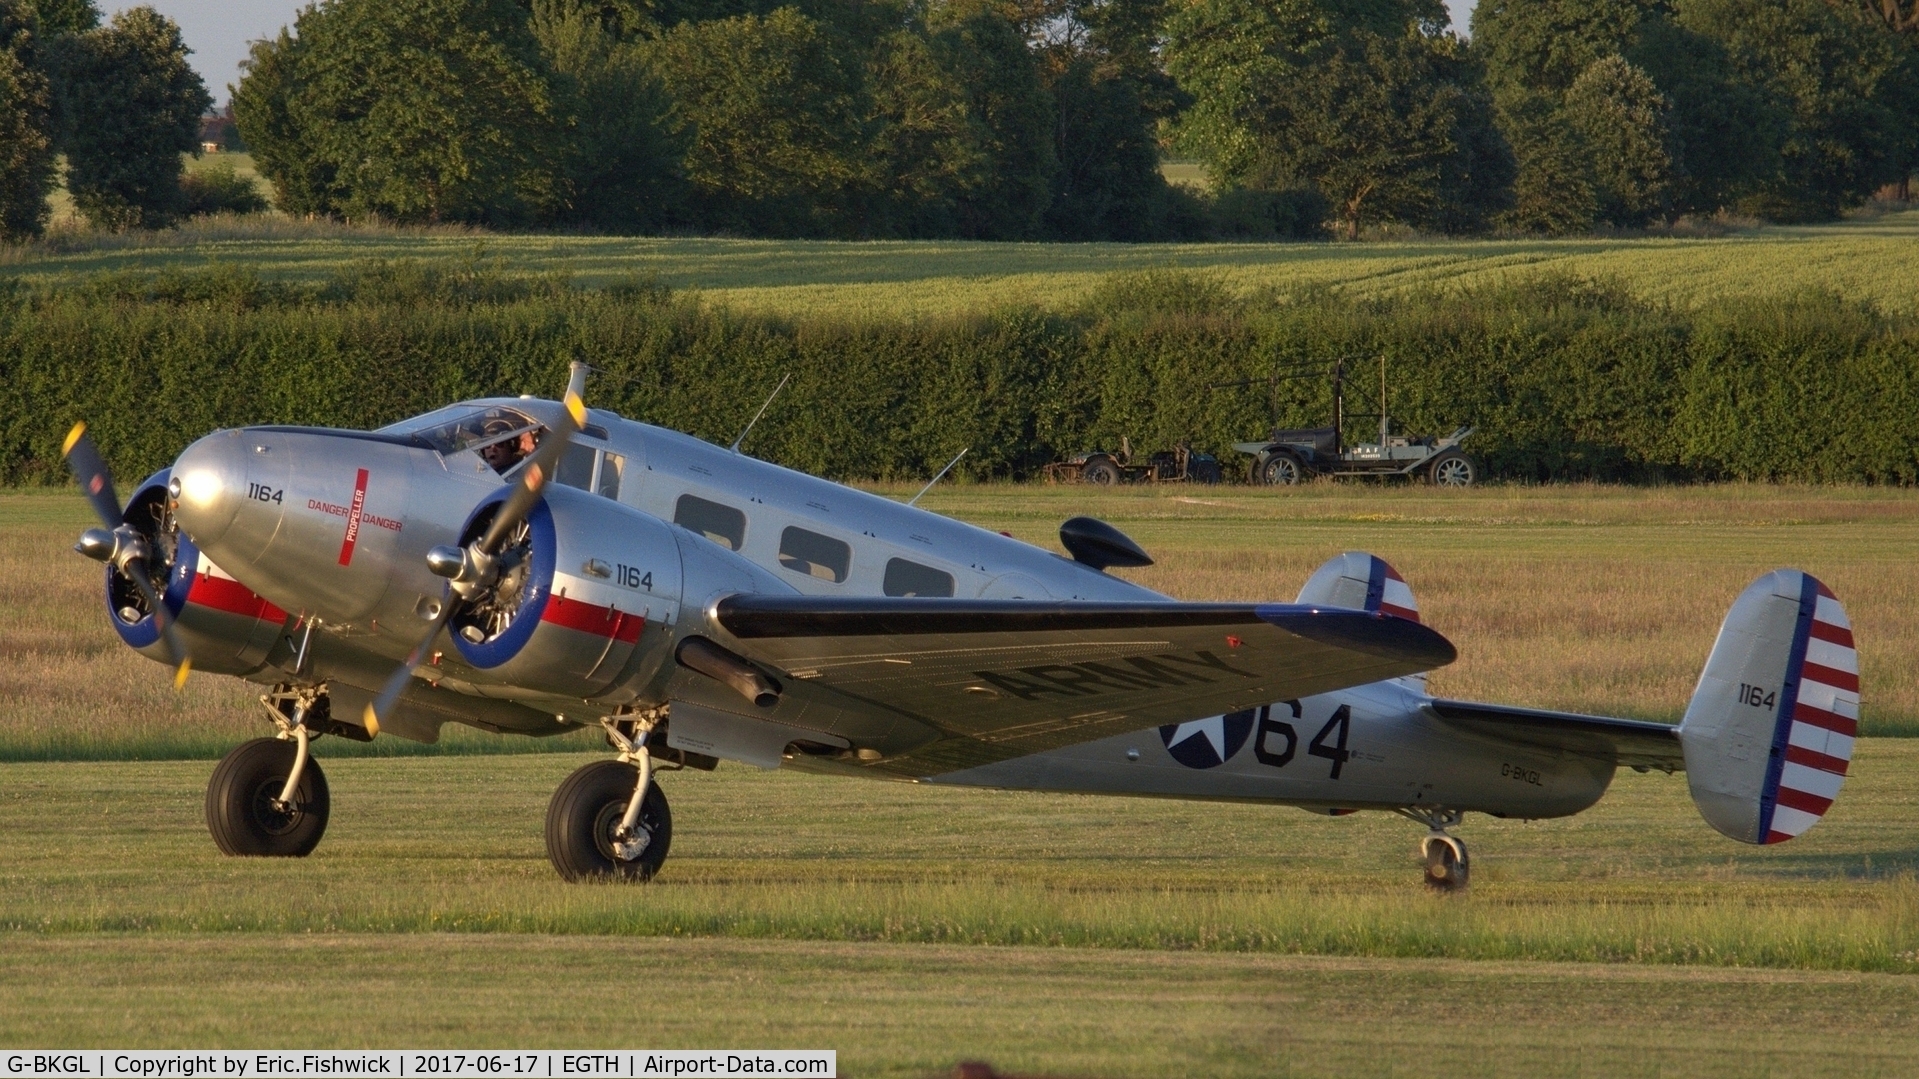 G-BKGL, 1952 Beech Expeditor 3TM C/N CA-164 (A-764), 3. G-BKGL preparing to depart the Evening Airshow, The Shuttleworth Collection, June, 2017